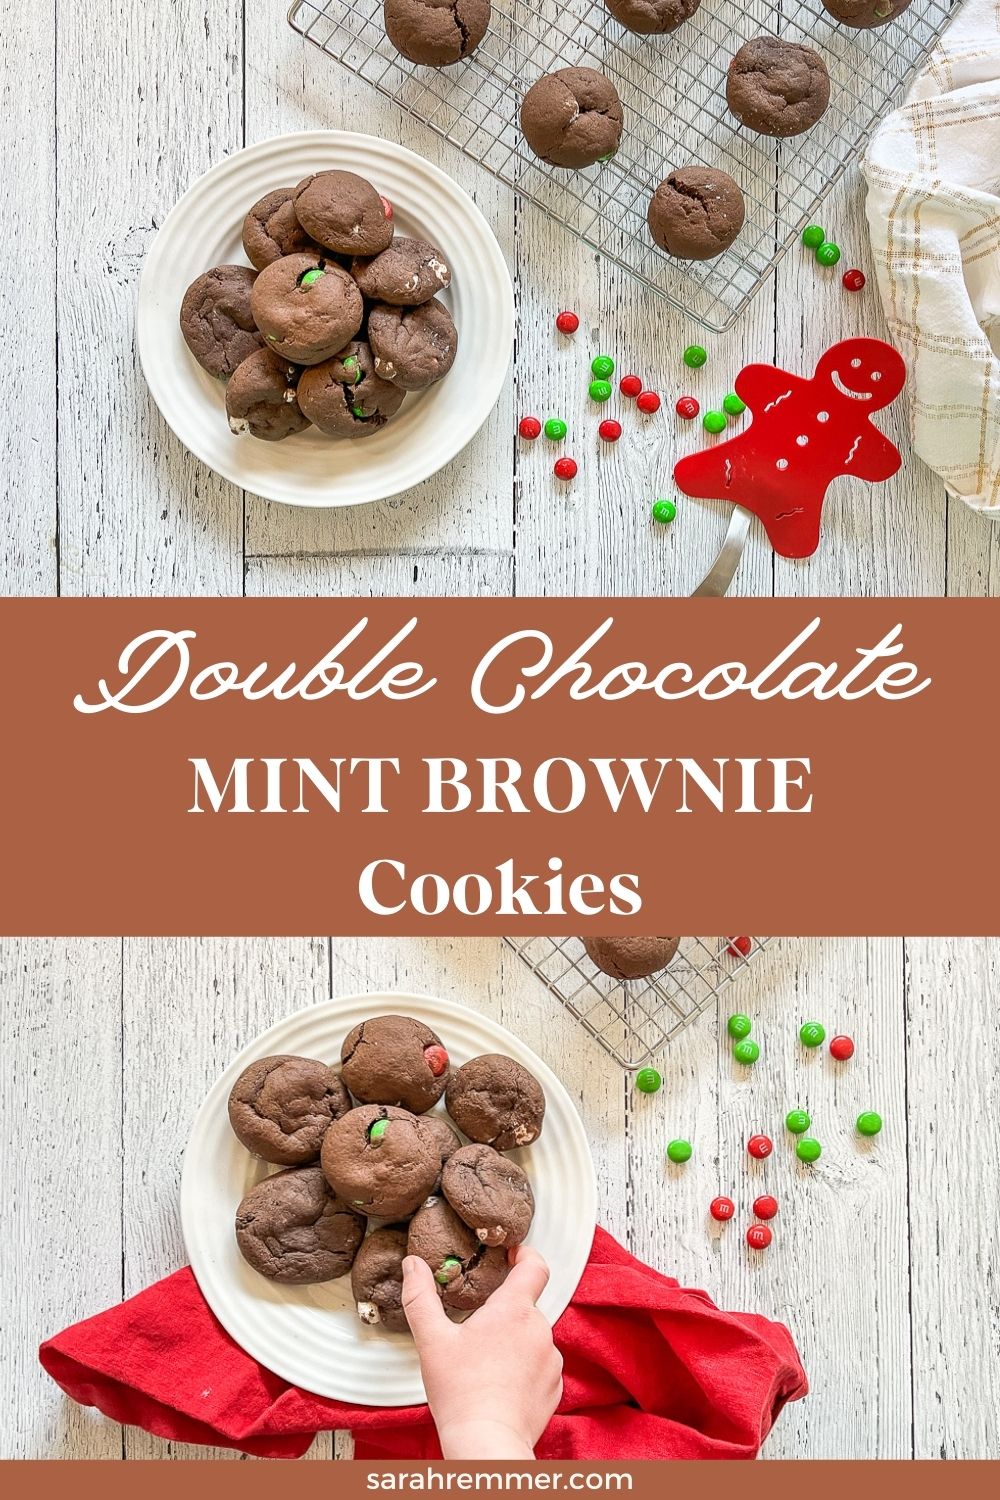 This is one of our go-to holiday baking recipes because it’s SO easy, and everyone loves them. These chewy, brownie-like cookies are delicious and are perfect for a holiday dessert or snack, or a cookie exchange!